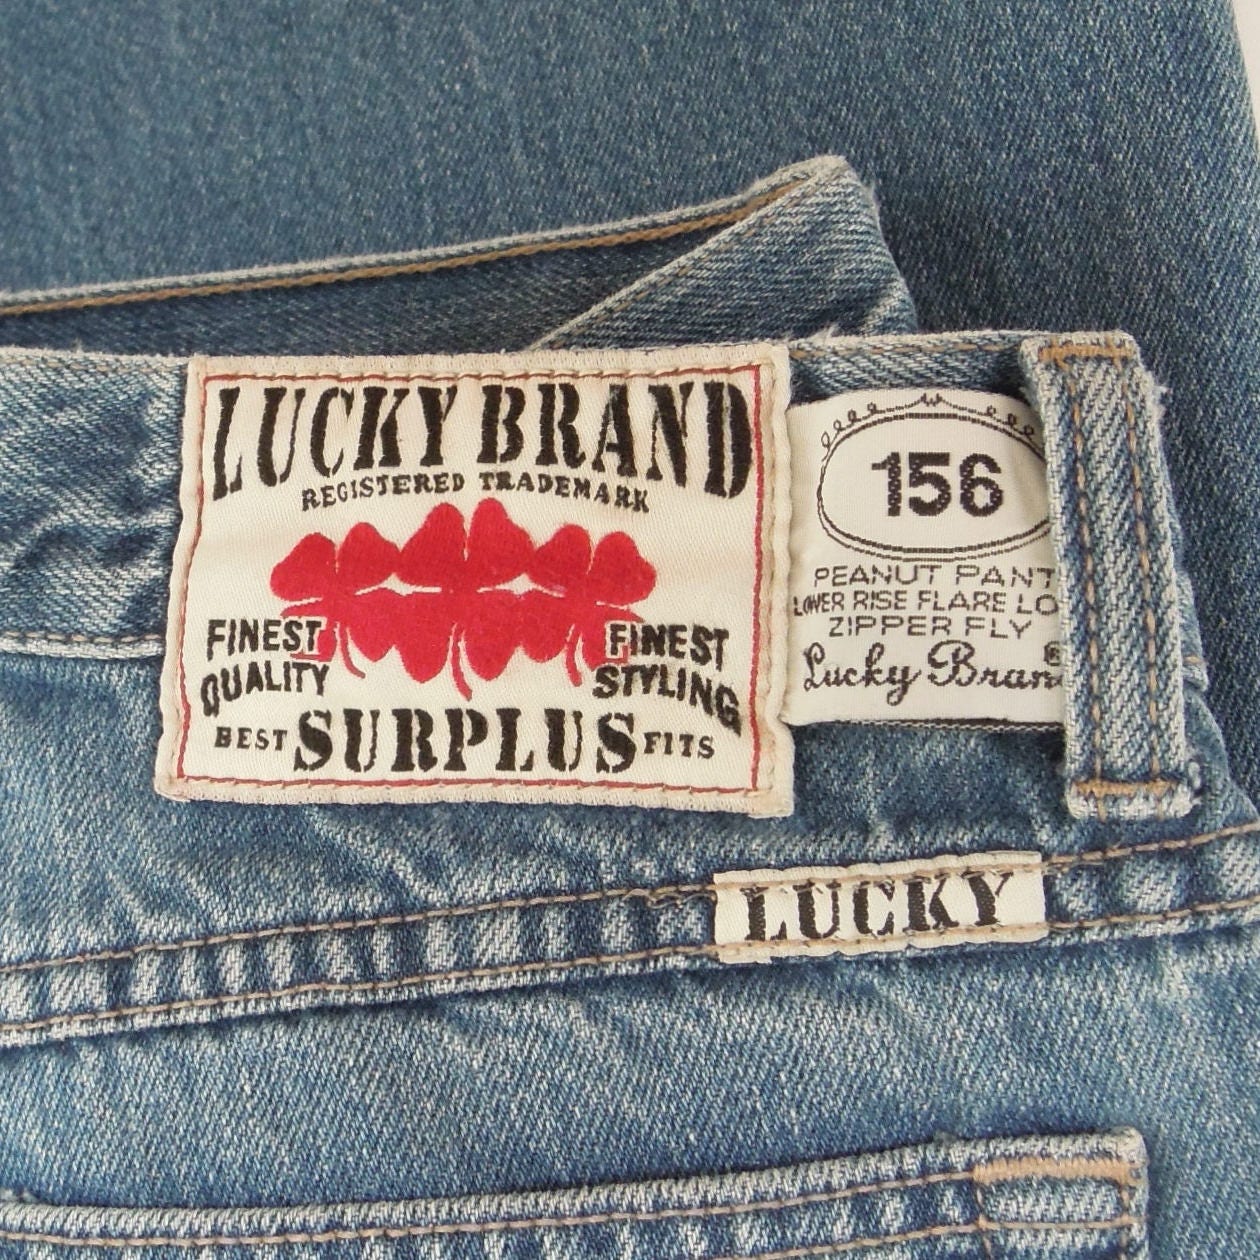 Lucky Brand 156 Peanut Pant Gene Montesano Lower Rise Flare 8/29 30 Waist  40 Hips 9 Front Rise Lucky Brand Dungarees -  New Zealand